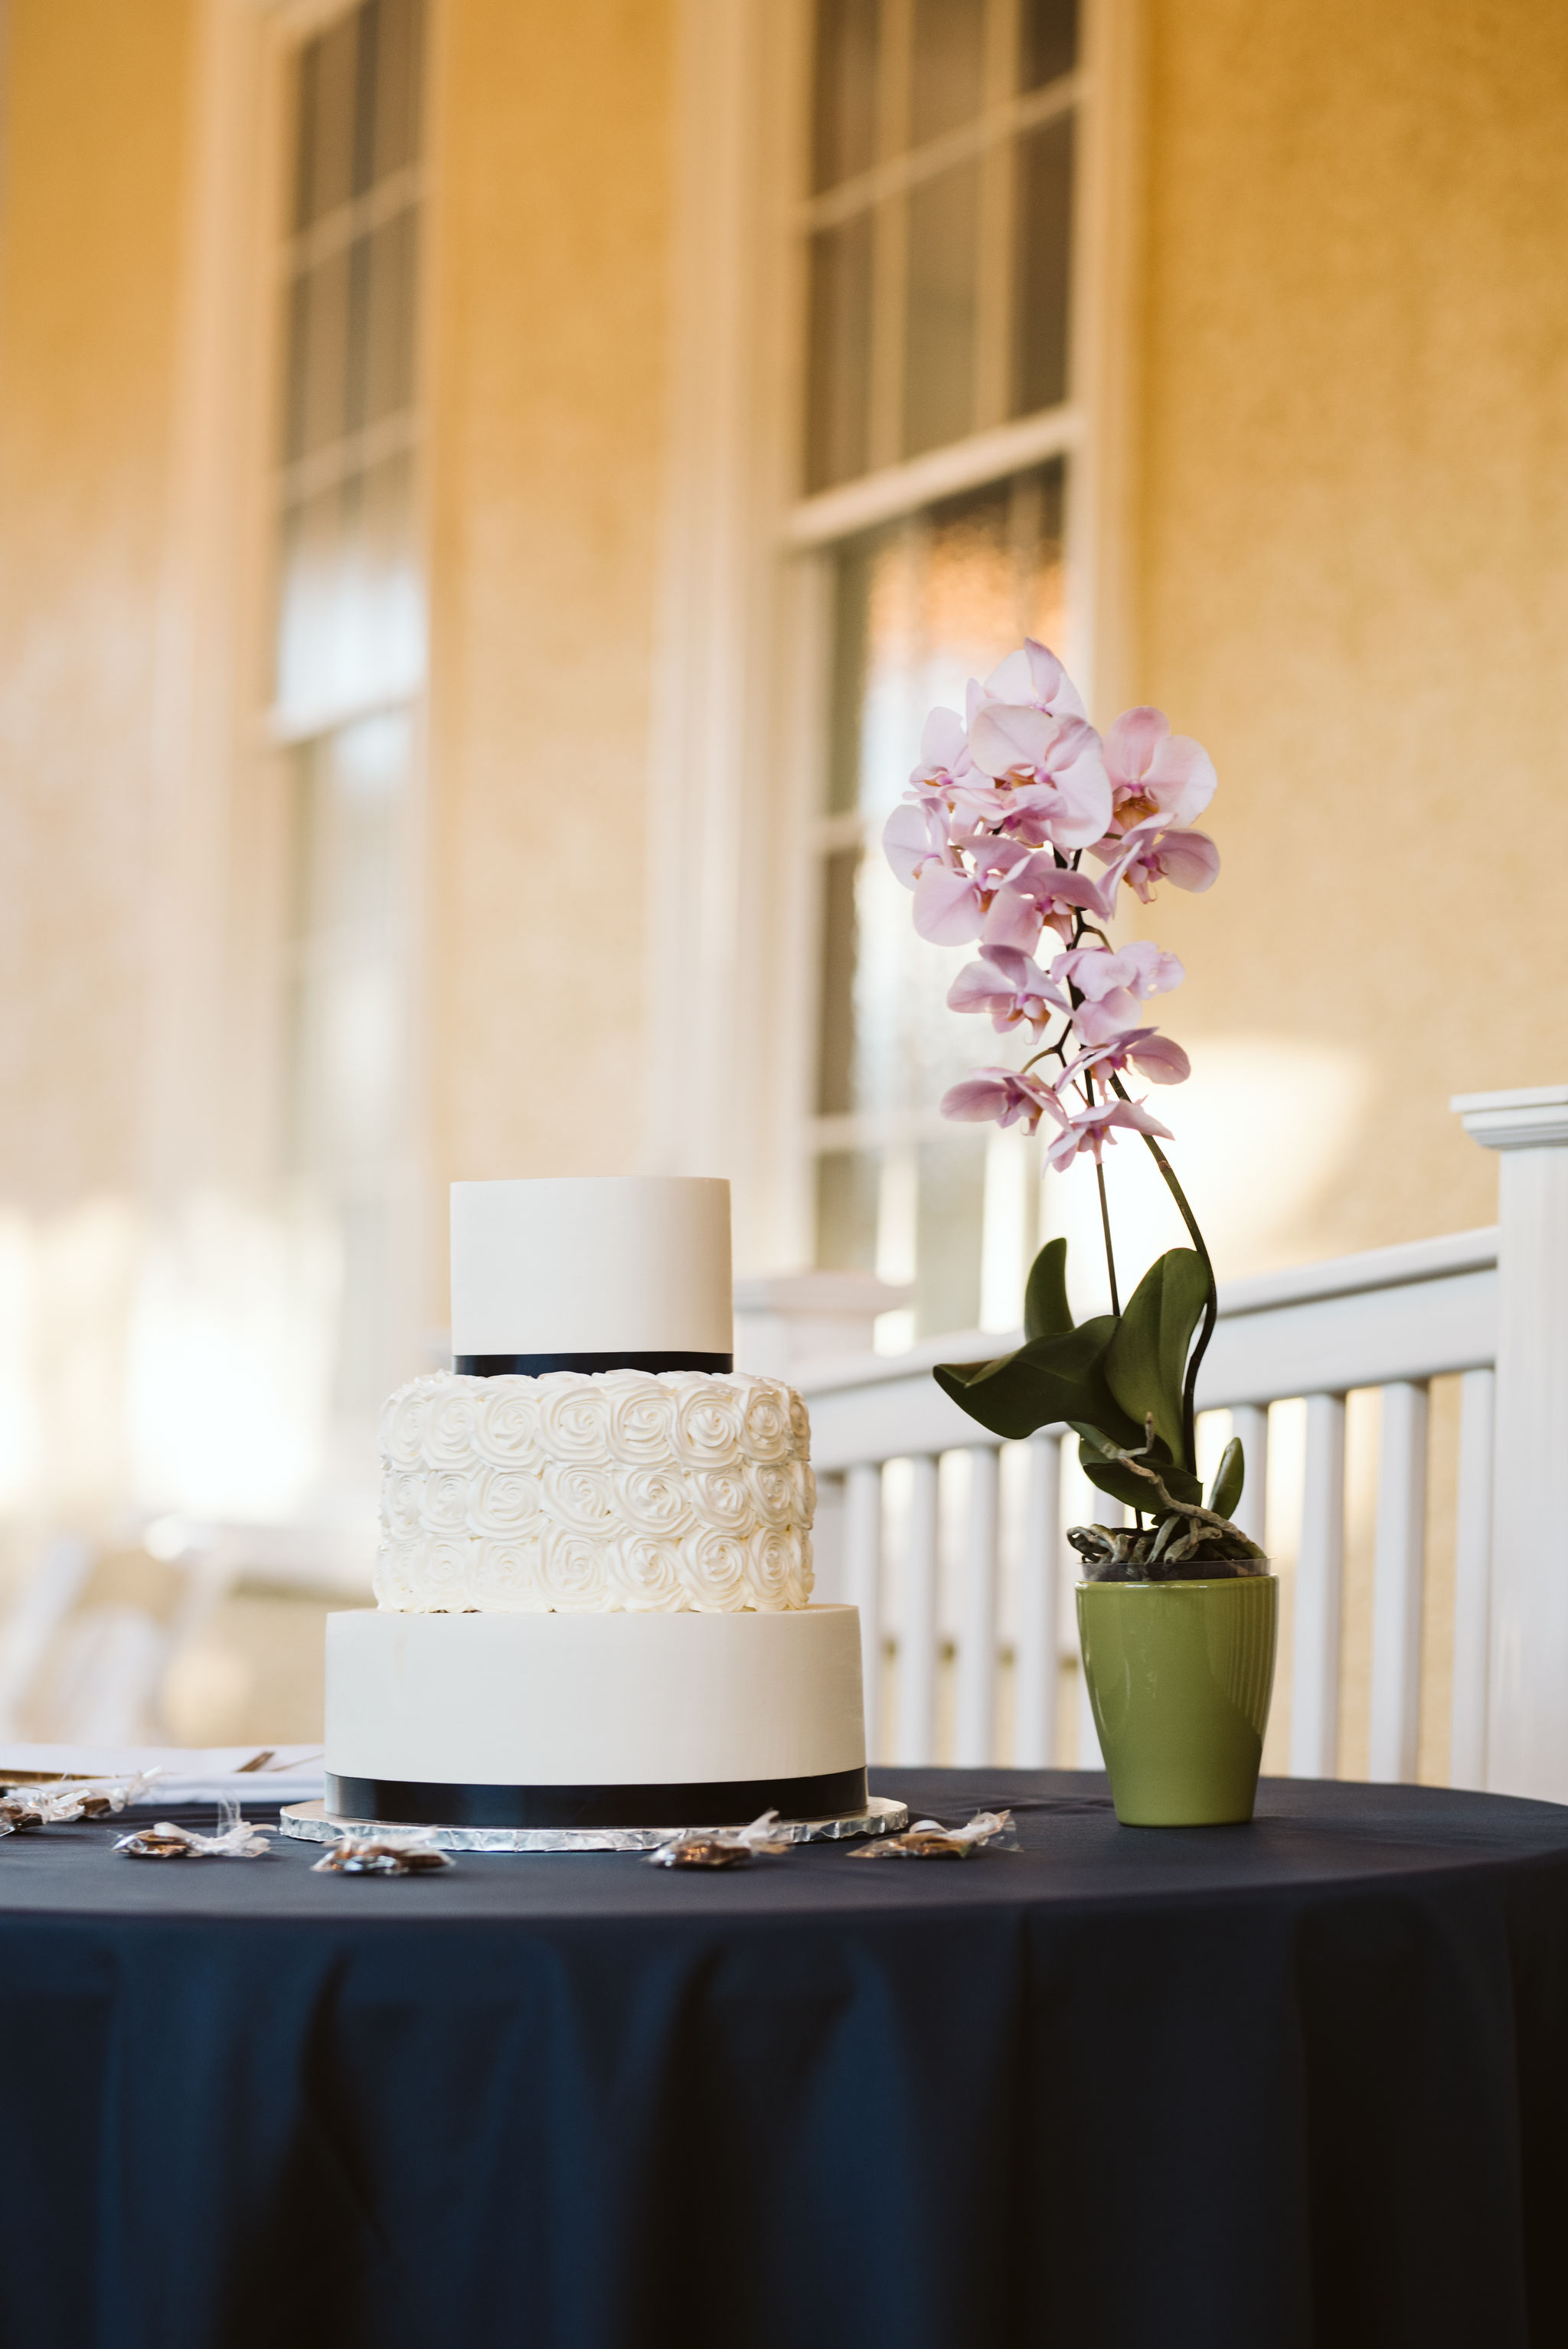  Baltimore, Maryland Wedding Photographer, The Mansion House at the Maryland Zoo, Relaxed, Romantic, Laid Back, Detail Photo of Classic Wedding Cake with Orchids 